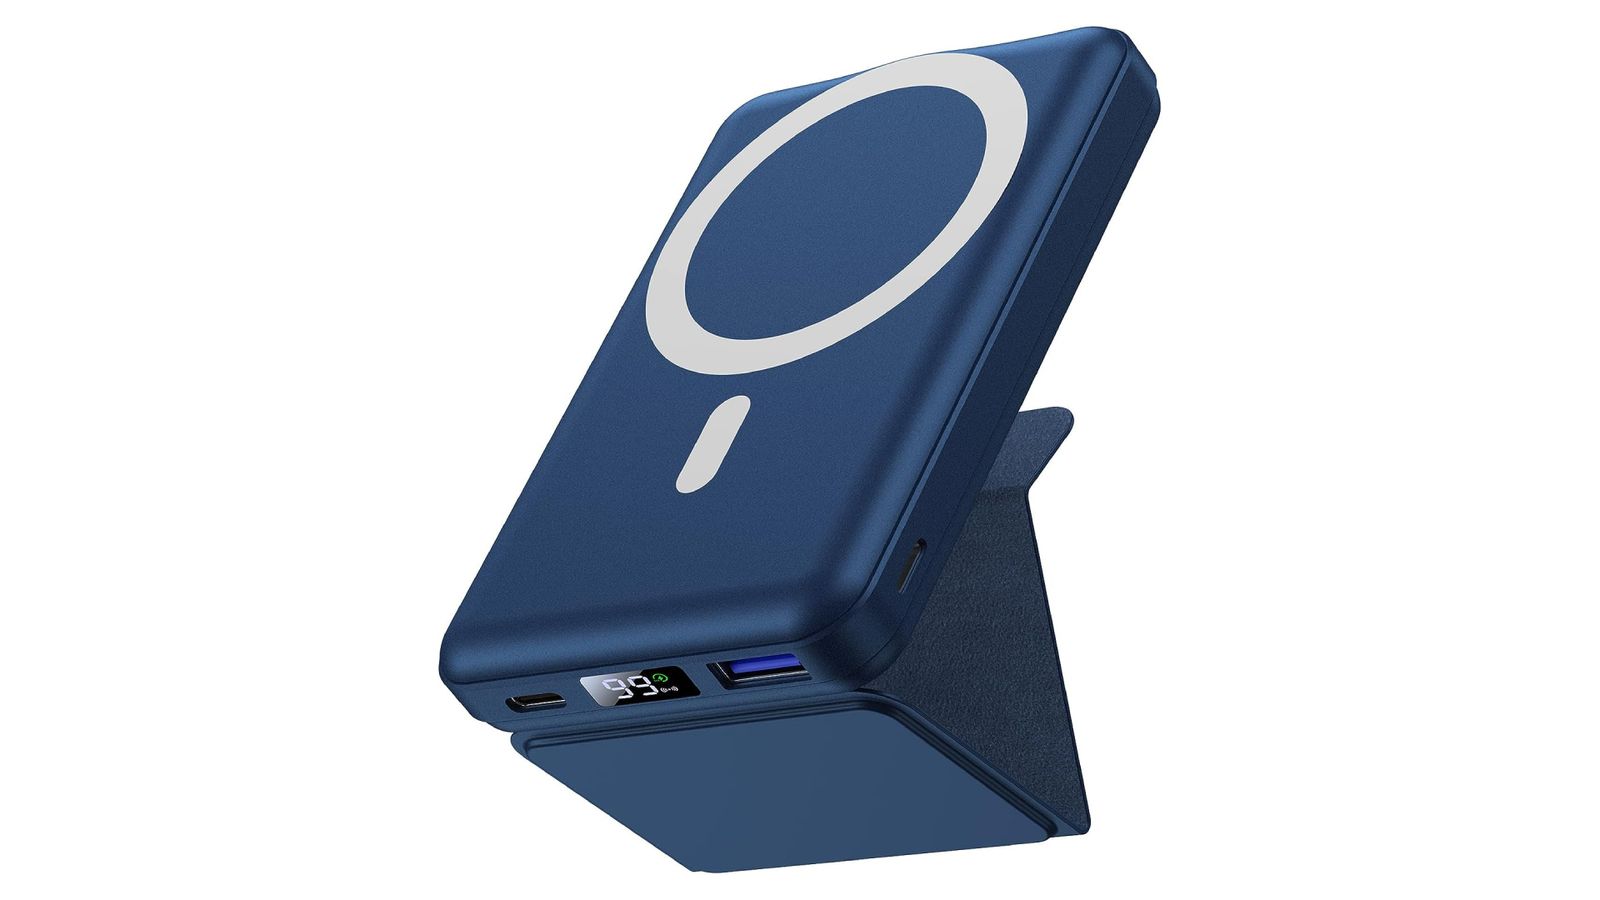 Yiisonger Magnetic Wireless Portable Charger product image of a navy and white magnetic, foldable charger.